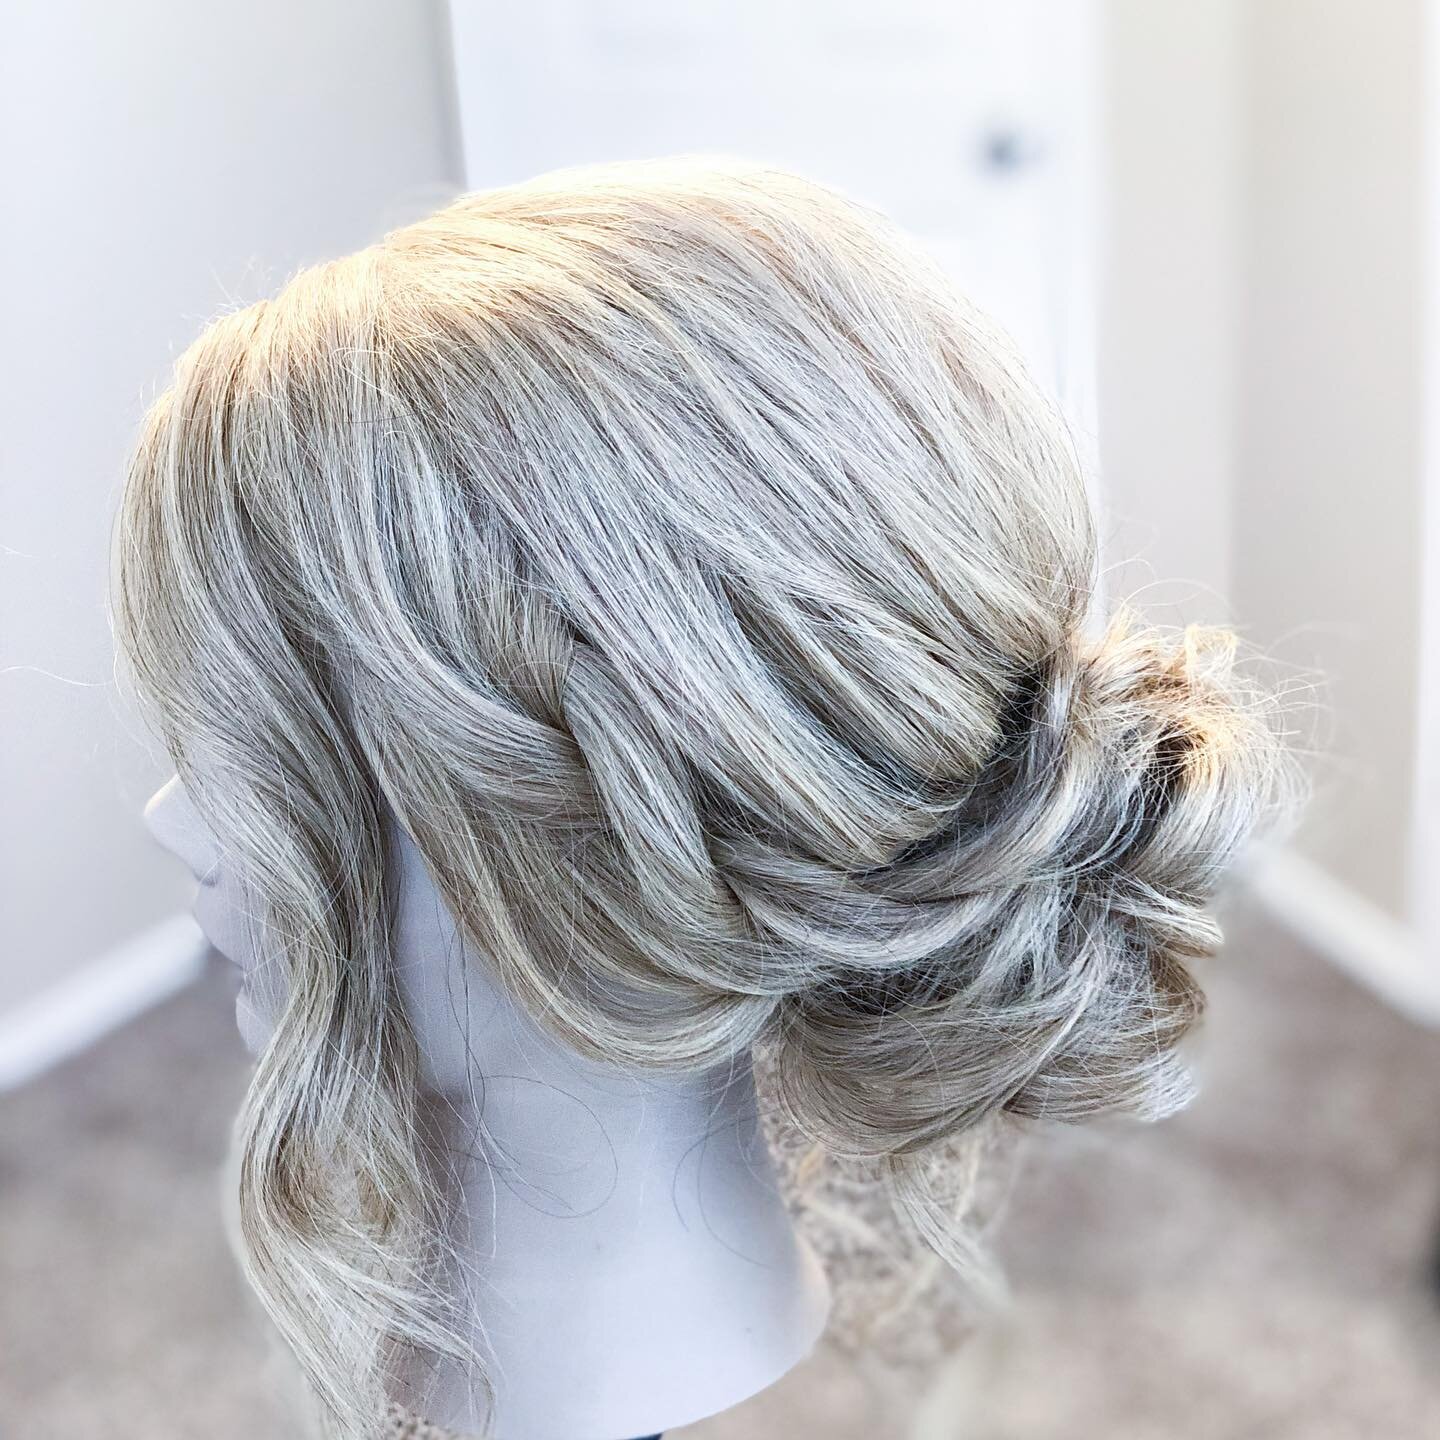 Tousled yet chic style that is perfect for bridesmaids💁🏼&zwj;♀️If you&rsquo;re going to be in a wedding, ask for this one💍 &bull;
&bull;
&bull;
#dfwwedding #fortworth #fortworthbride #dfwmua #dfwmakeupartist #weddinghairstyles #fortworthtx #texasw